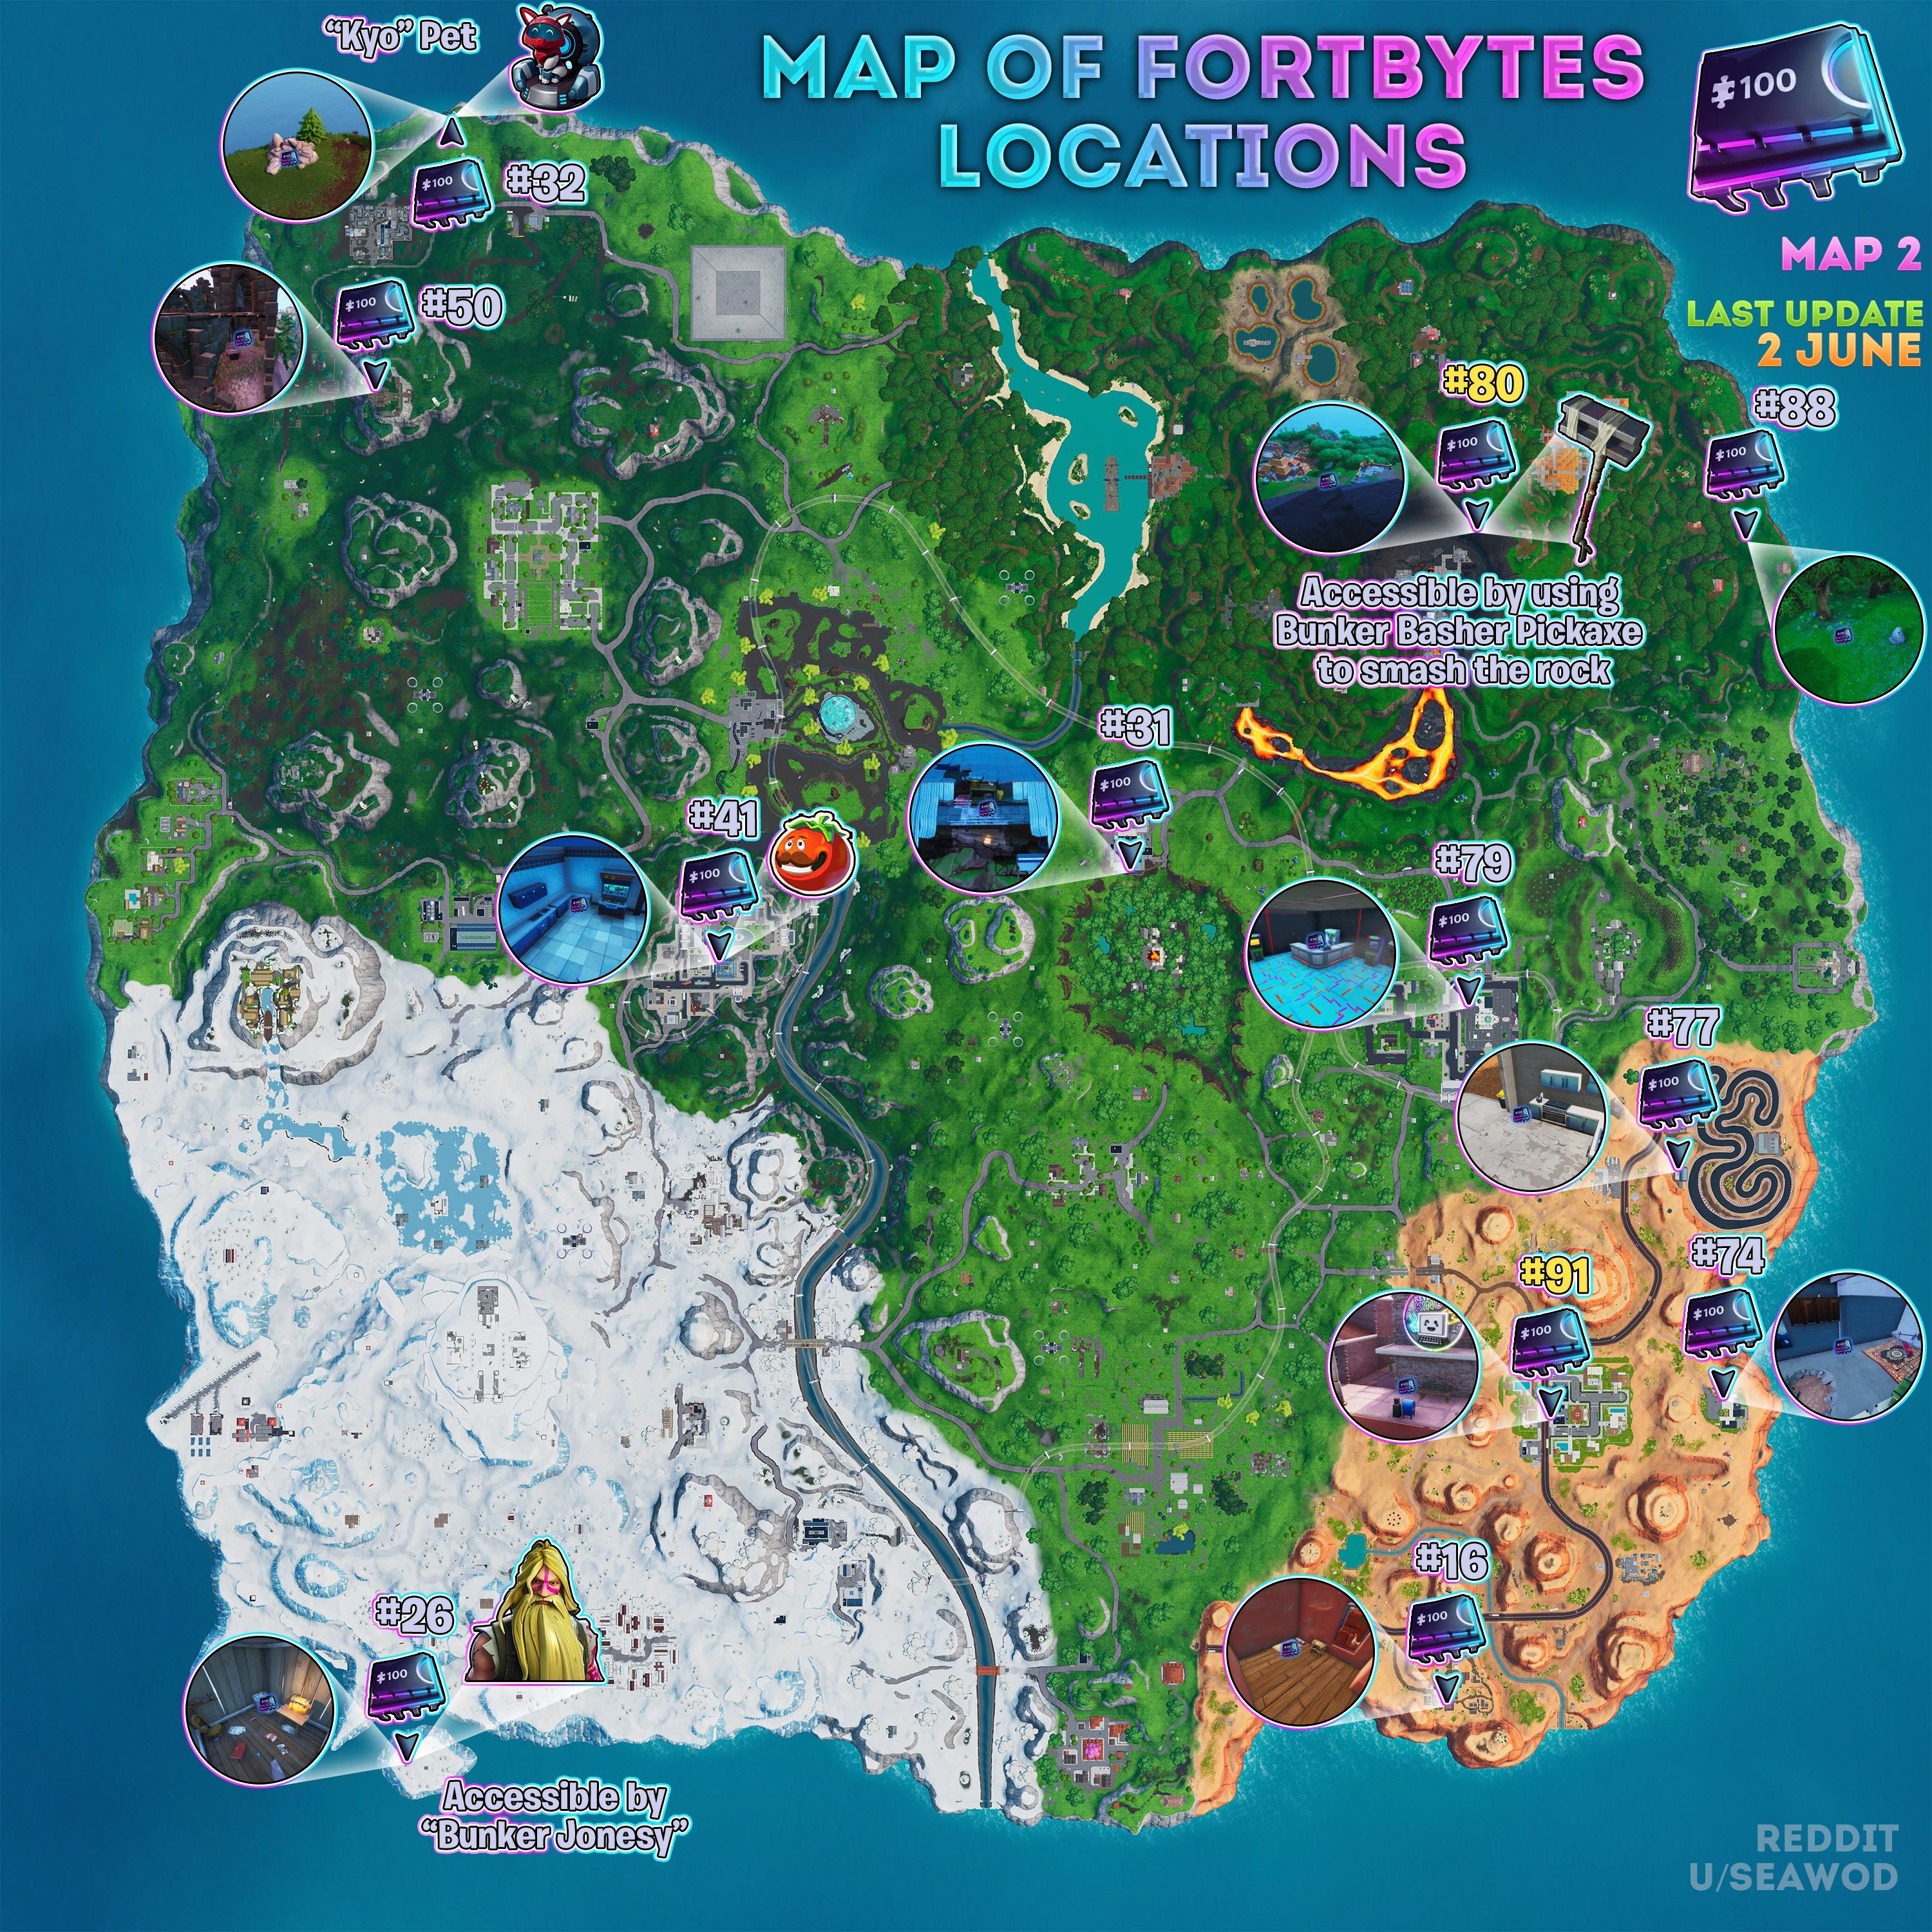 All Fortnite Fortbyte Locations - Fortbytes 16, 26, 31, 32, 41, 50, 74, 77, 79, 80, 88, 91